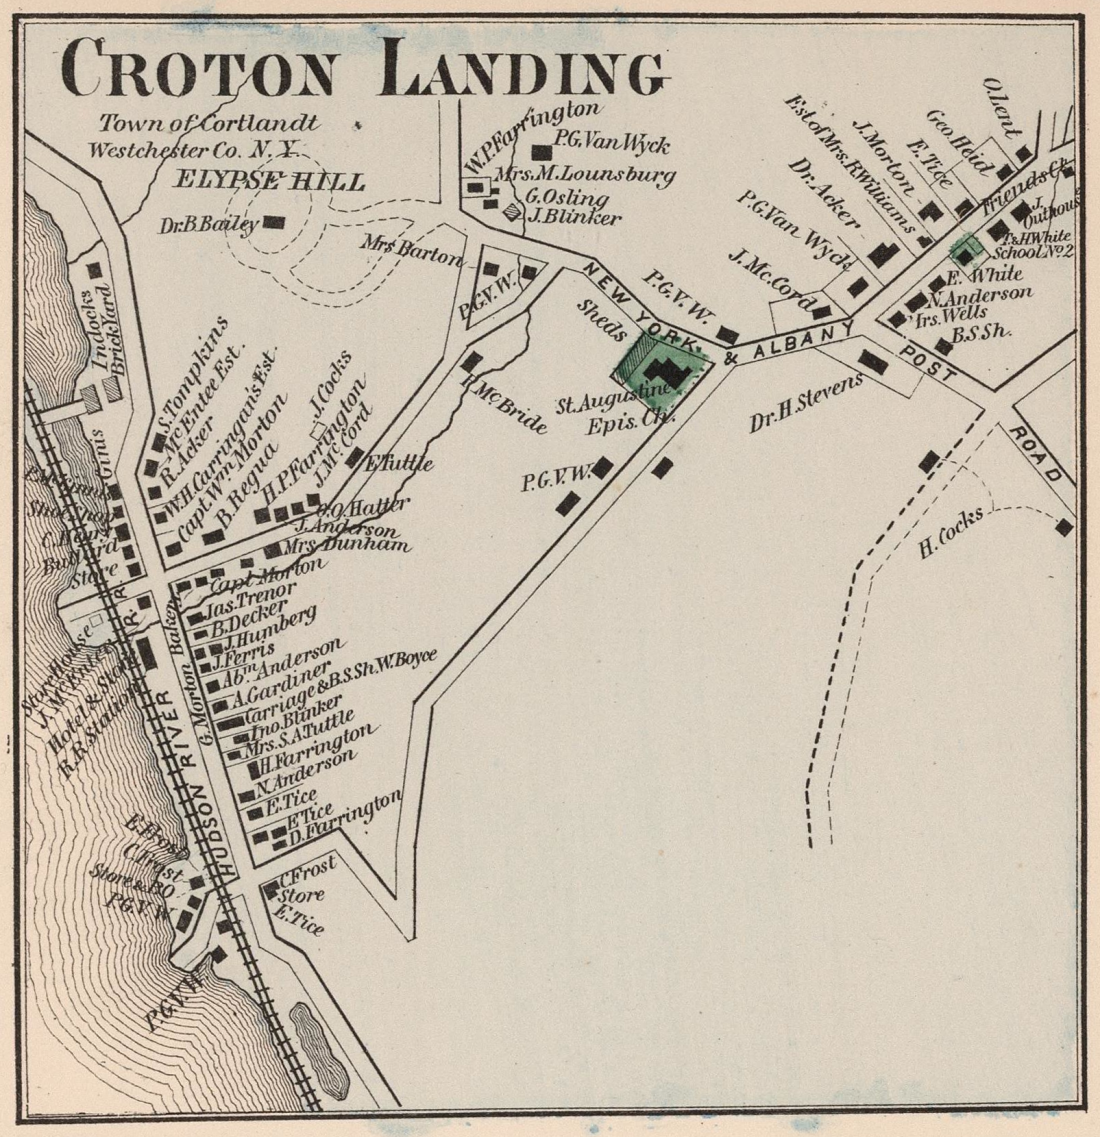 Croton Landing from plate 44 of the County Atlas Of Westchester New York, published by J.B. Beers & Co., 1872.